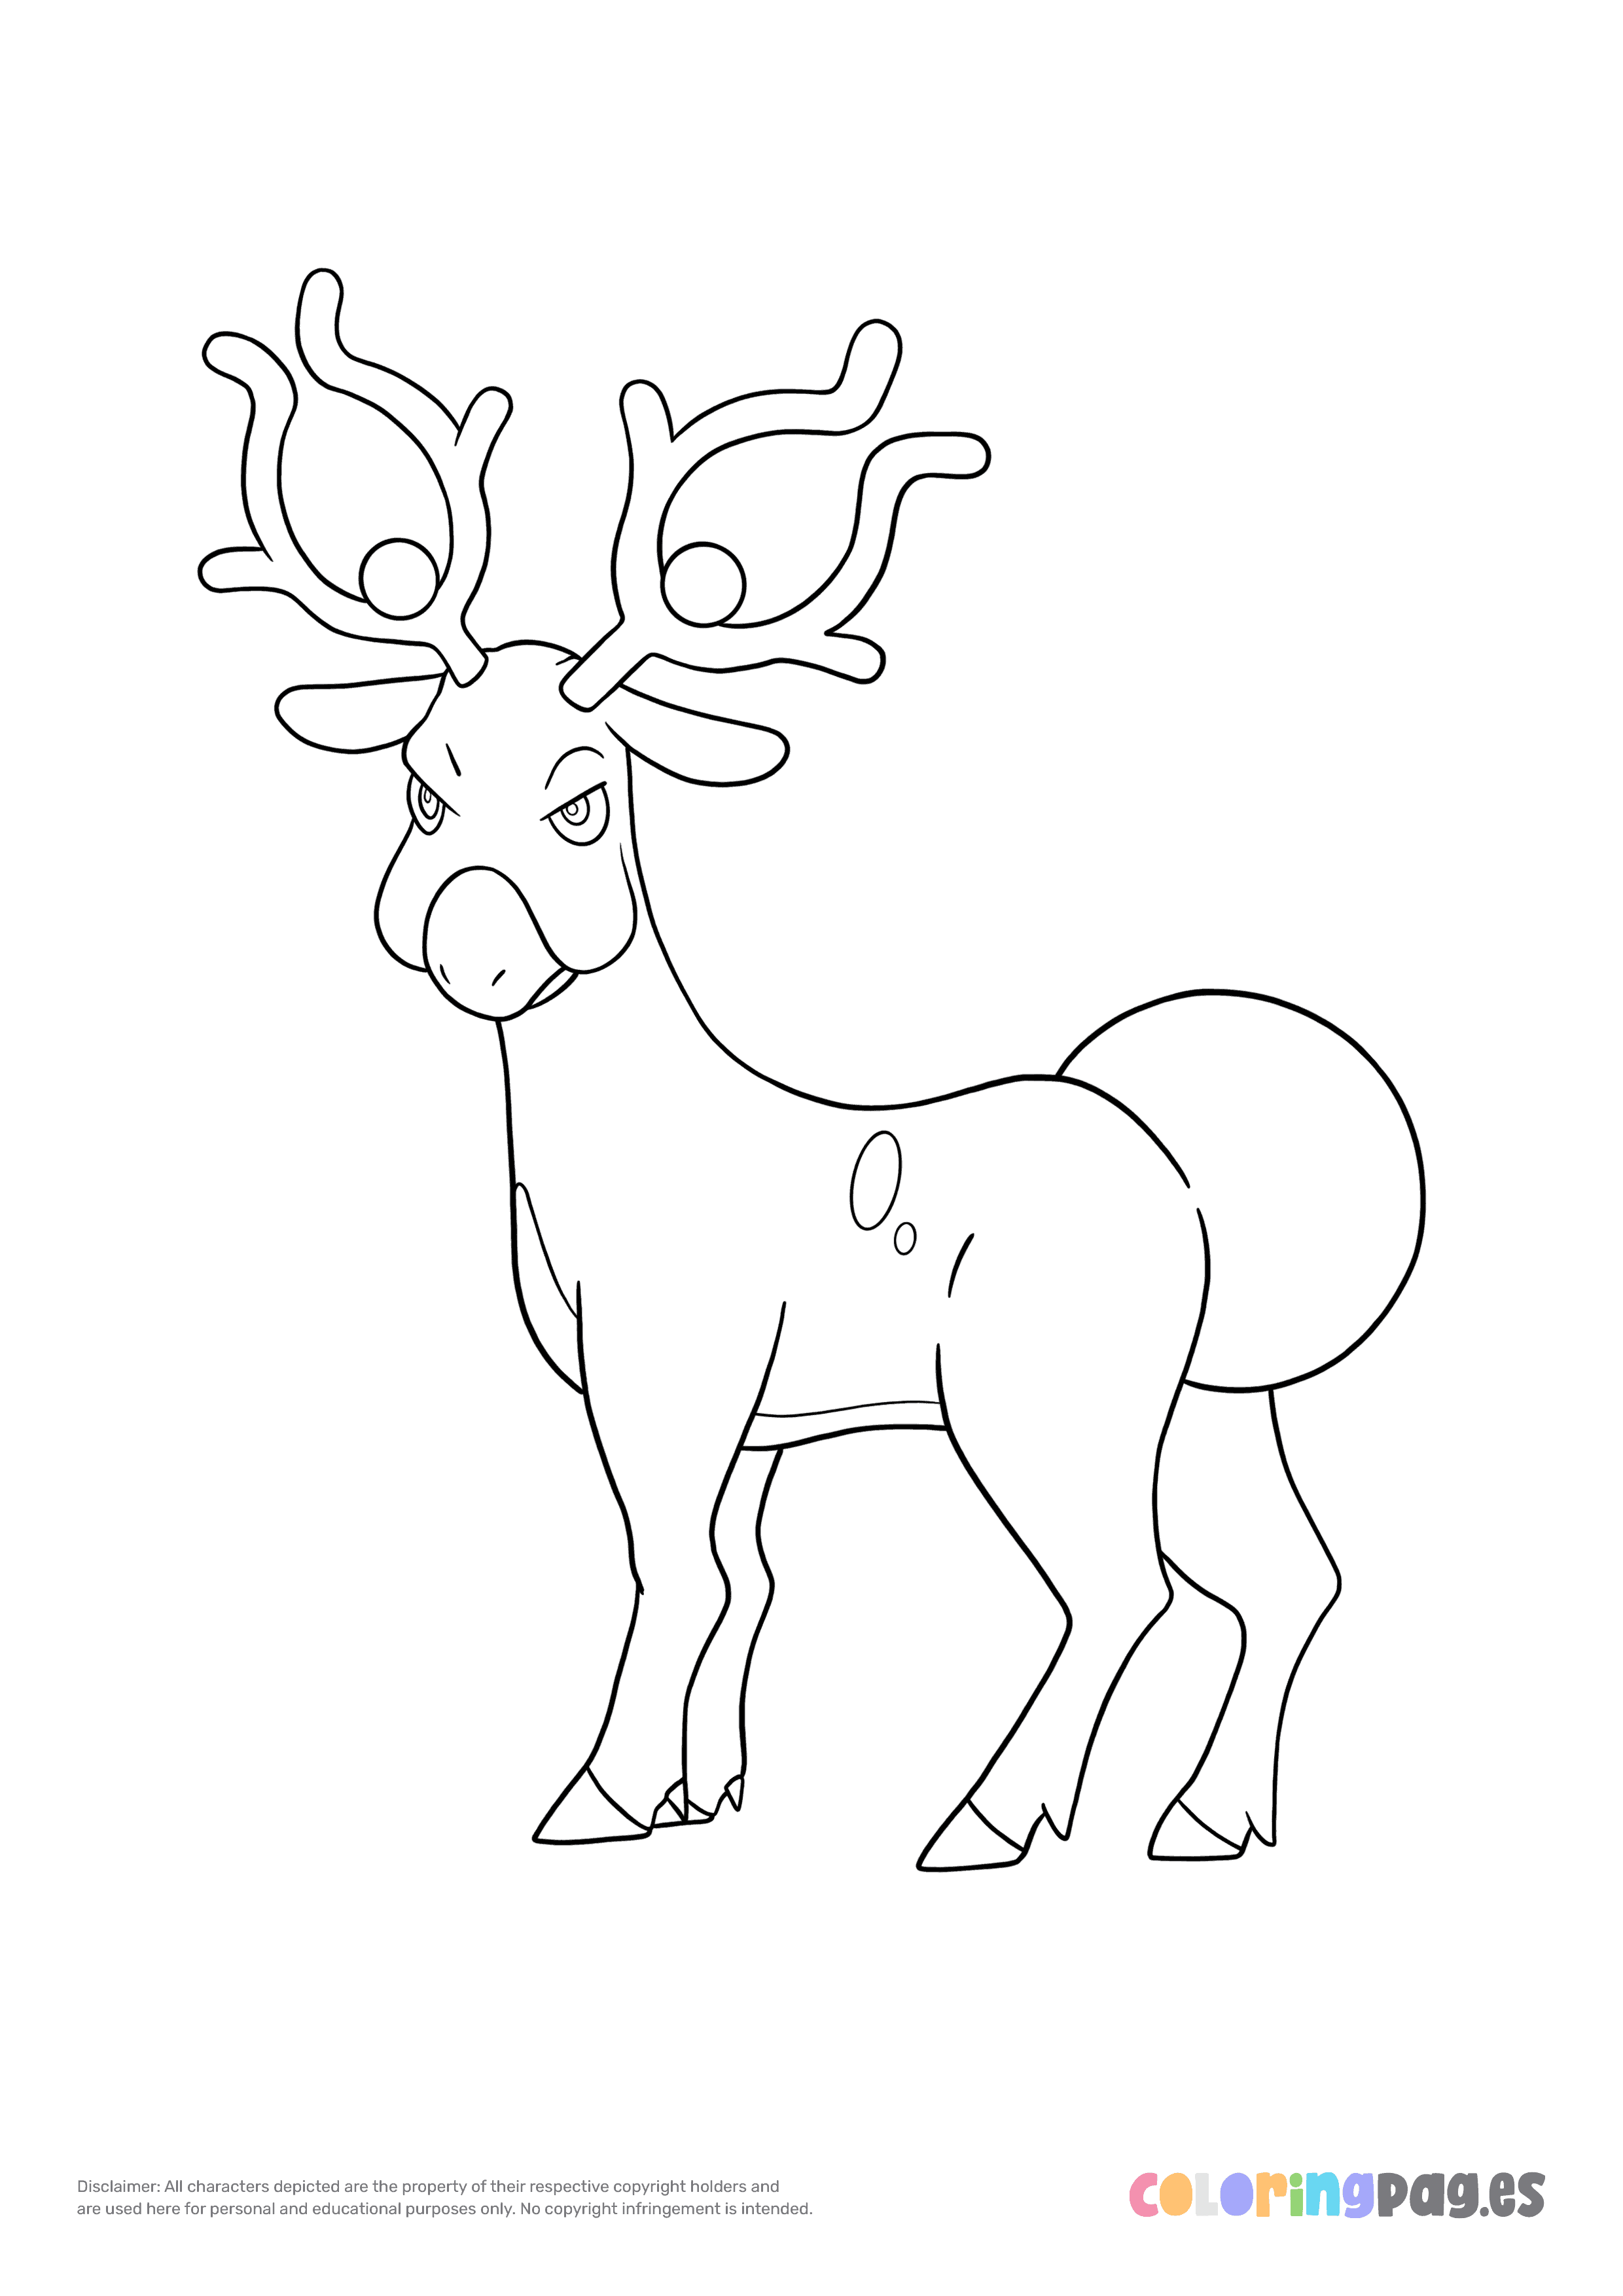 Pokémon Stantler coloring page